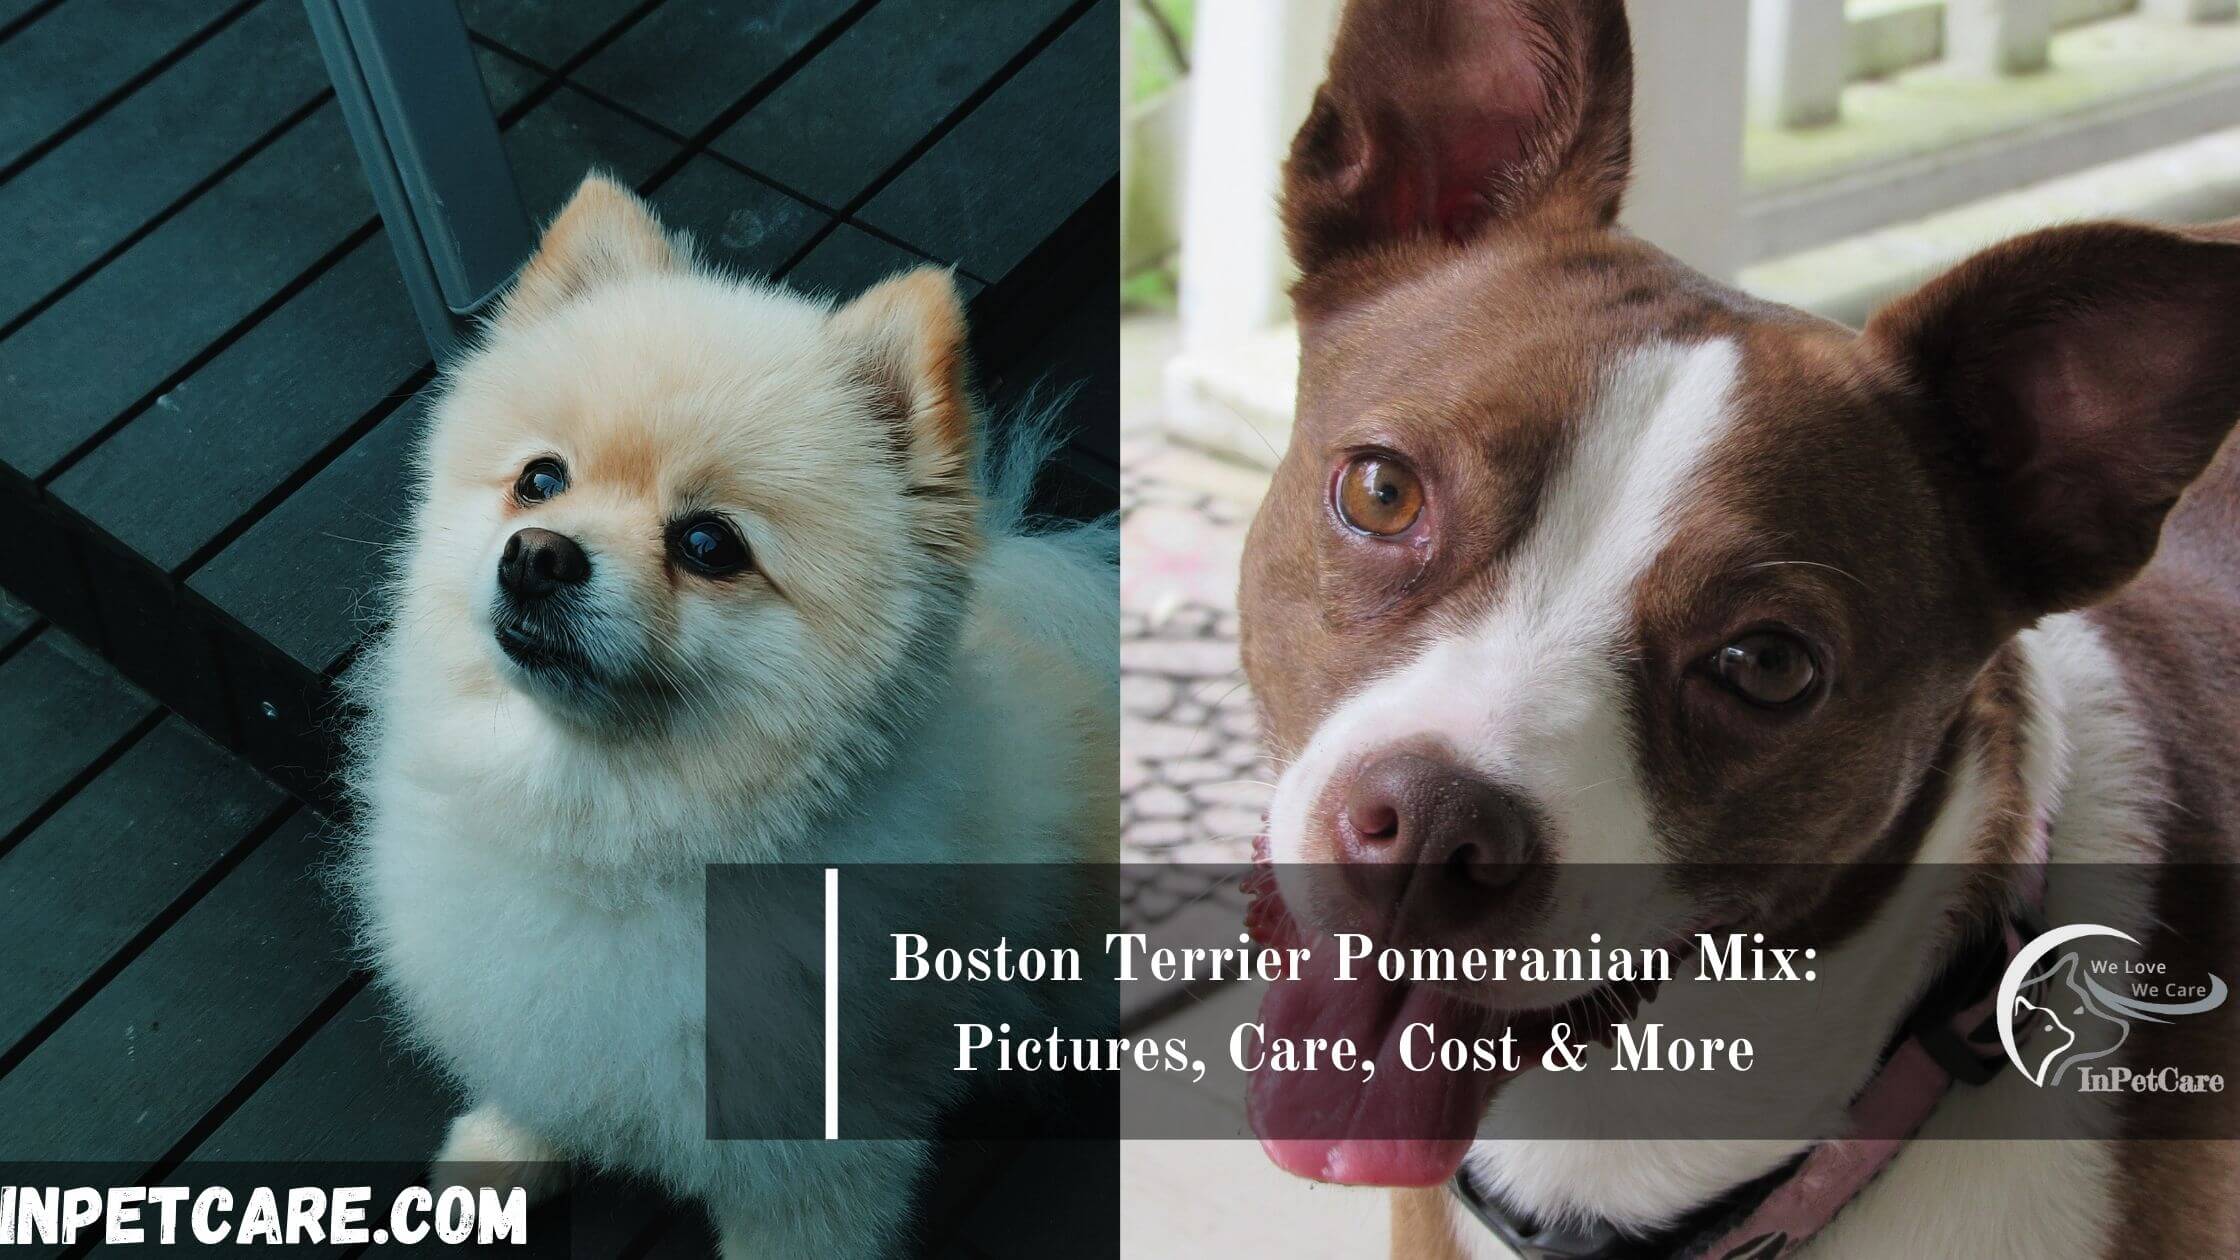 Boston Terrier Pomeranian Mix: Pictures, Care, Cost and More.